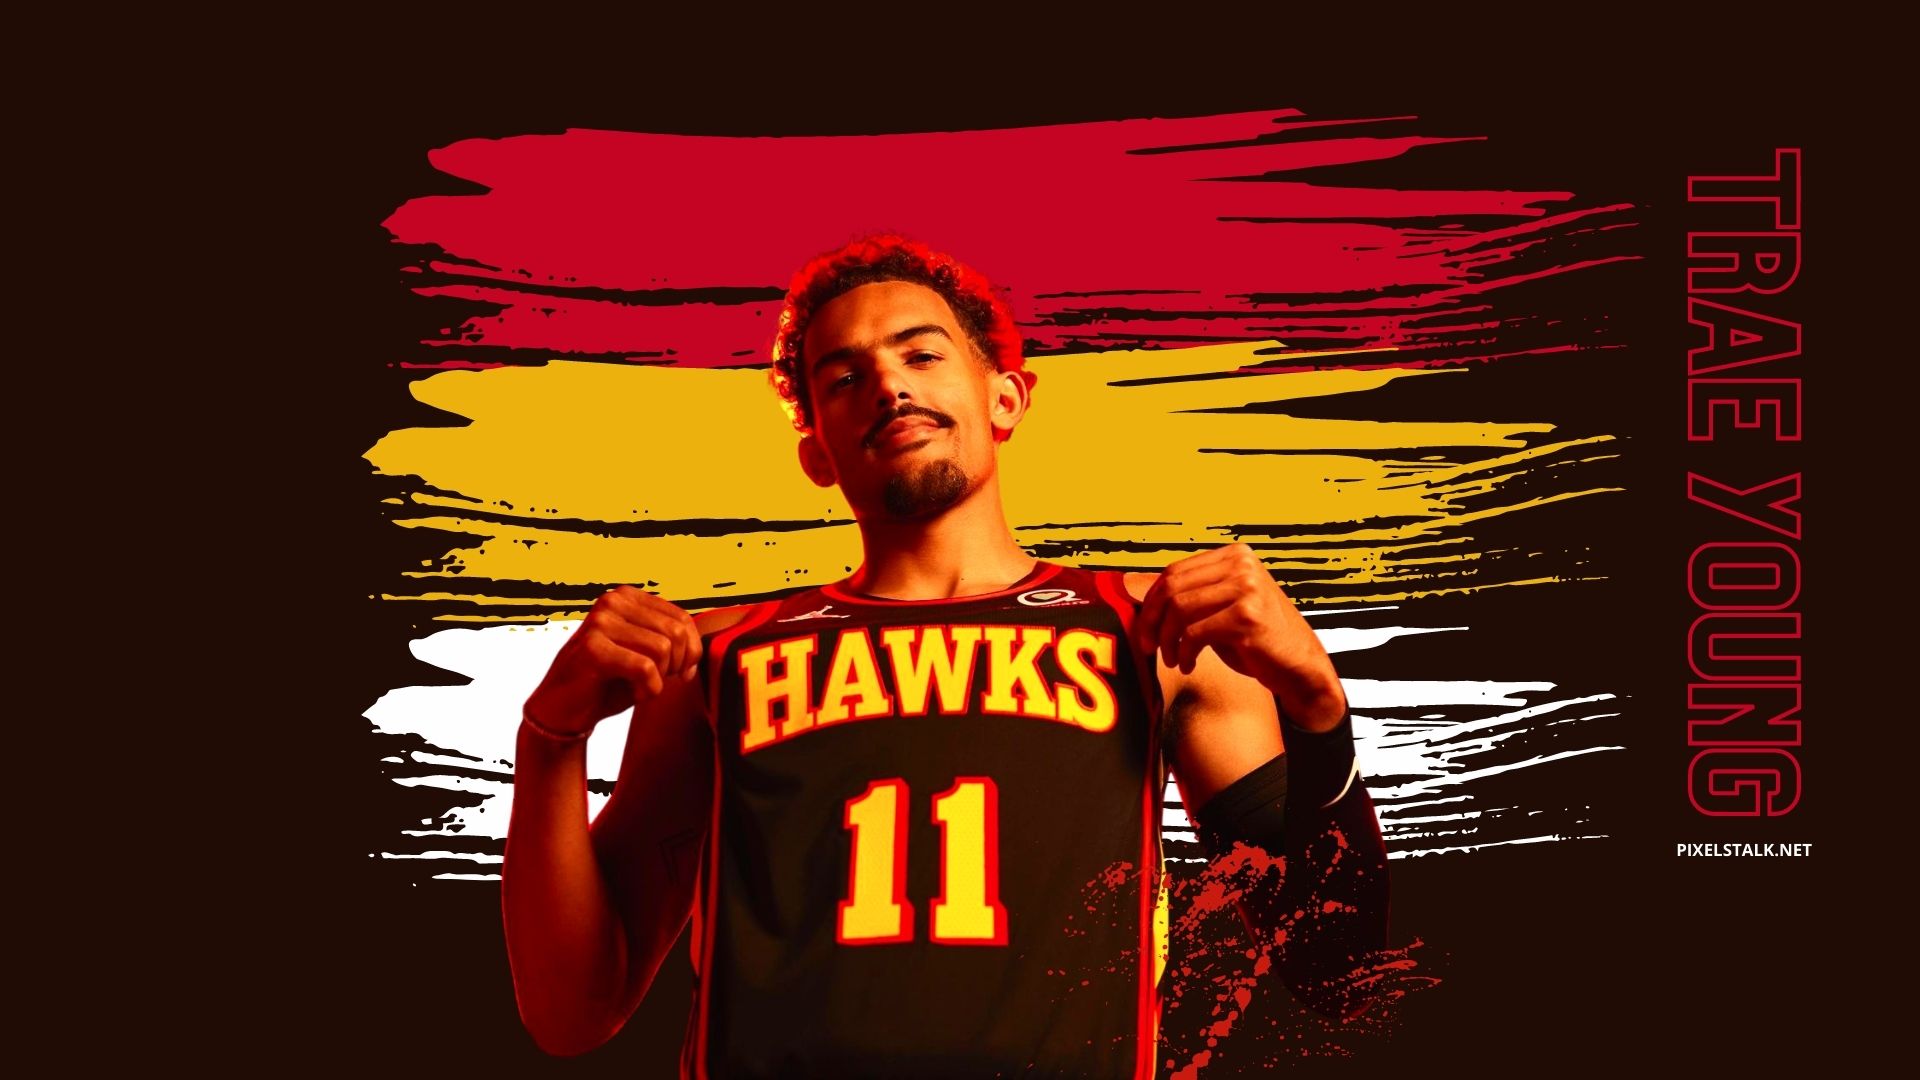 trae young hd